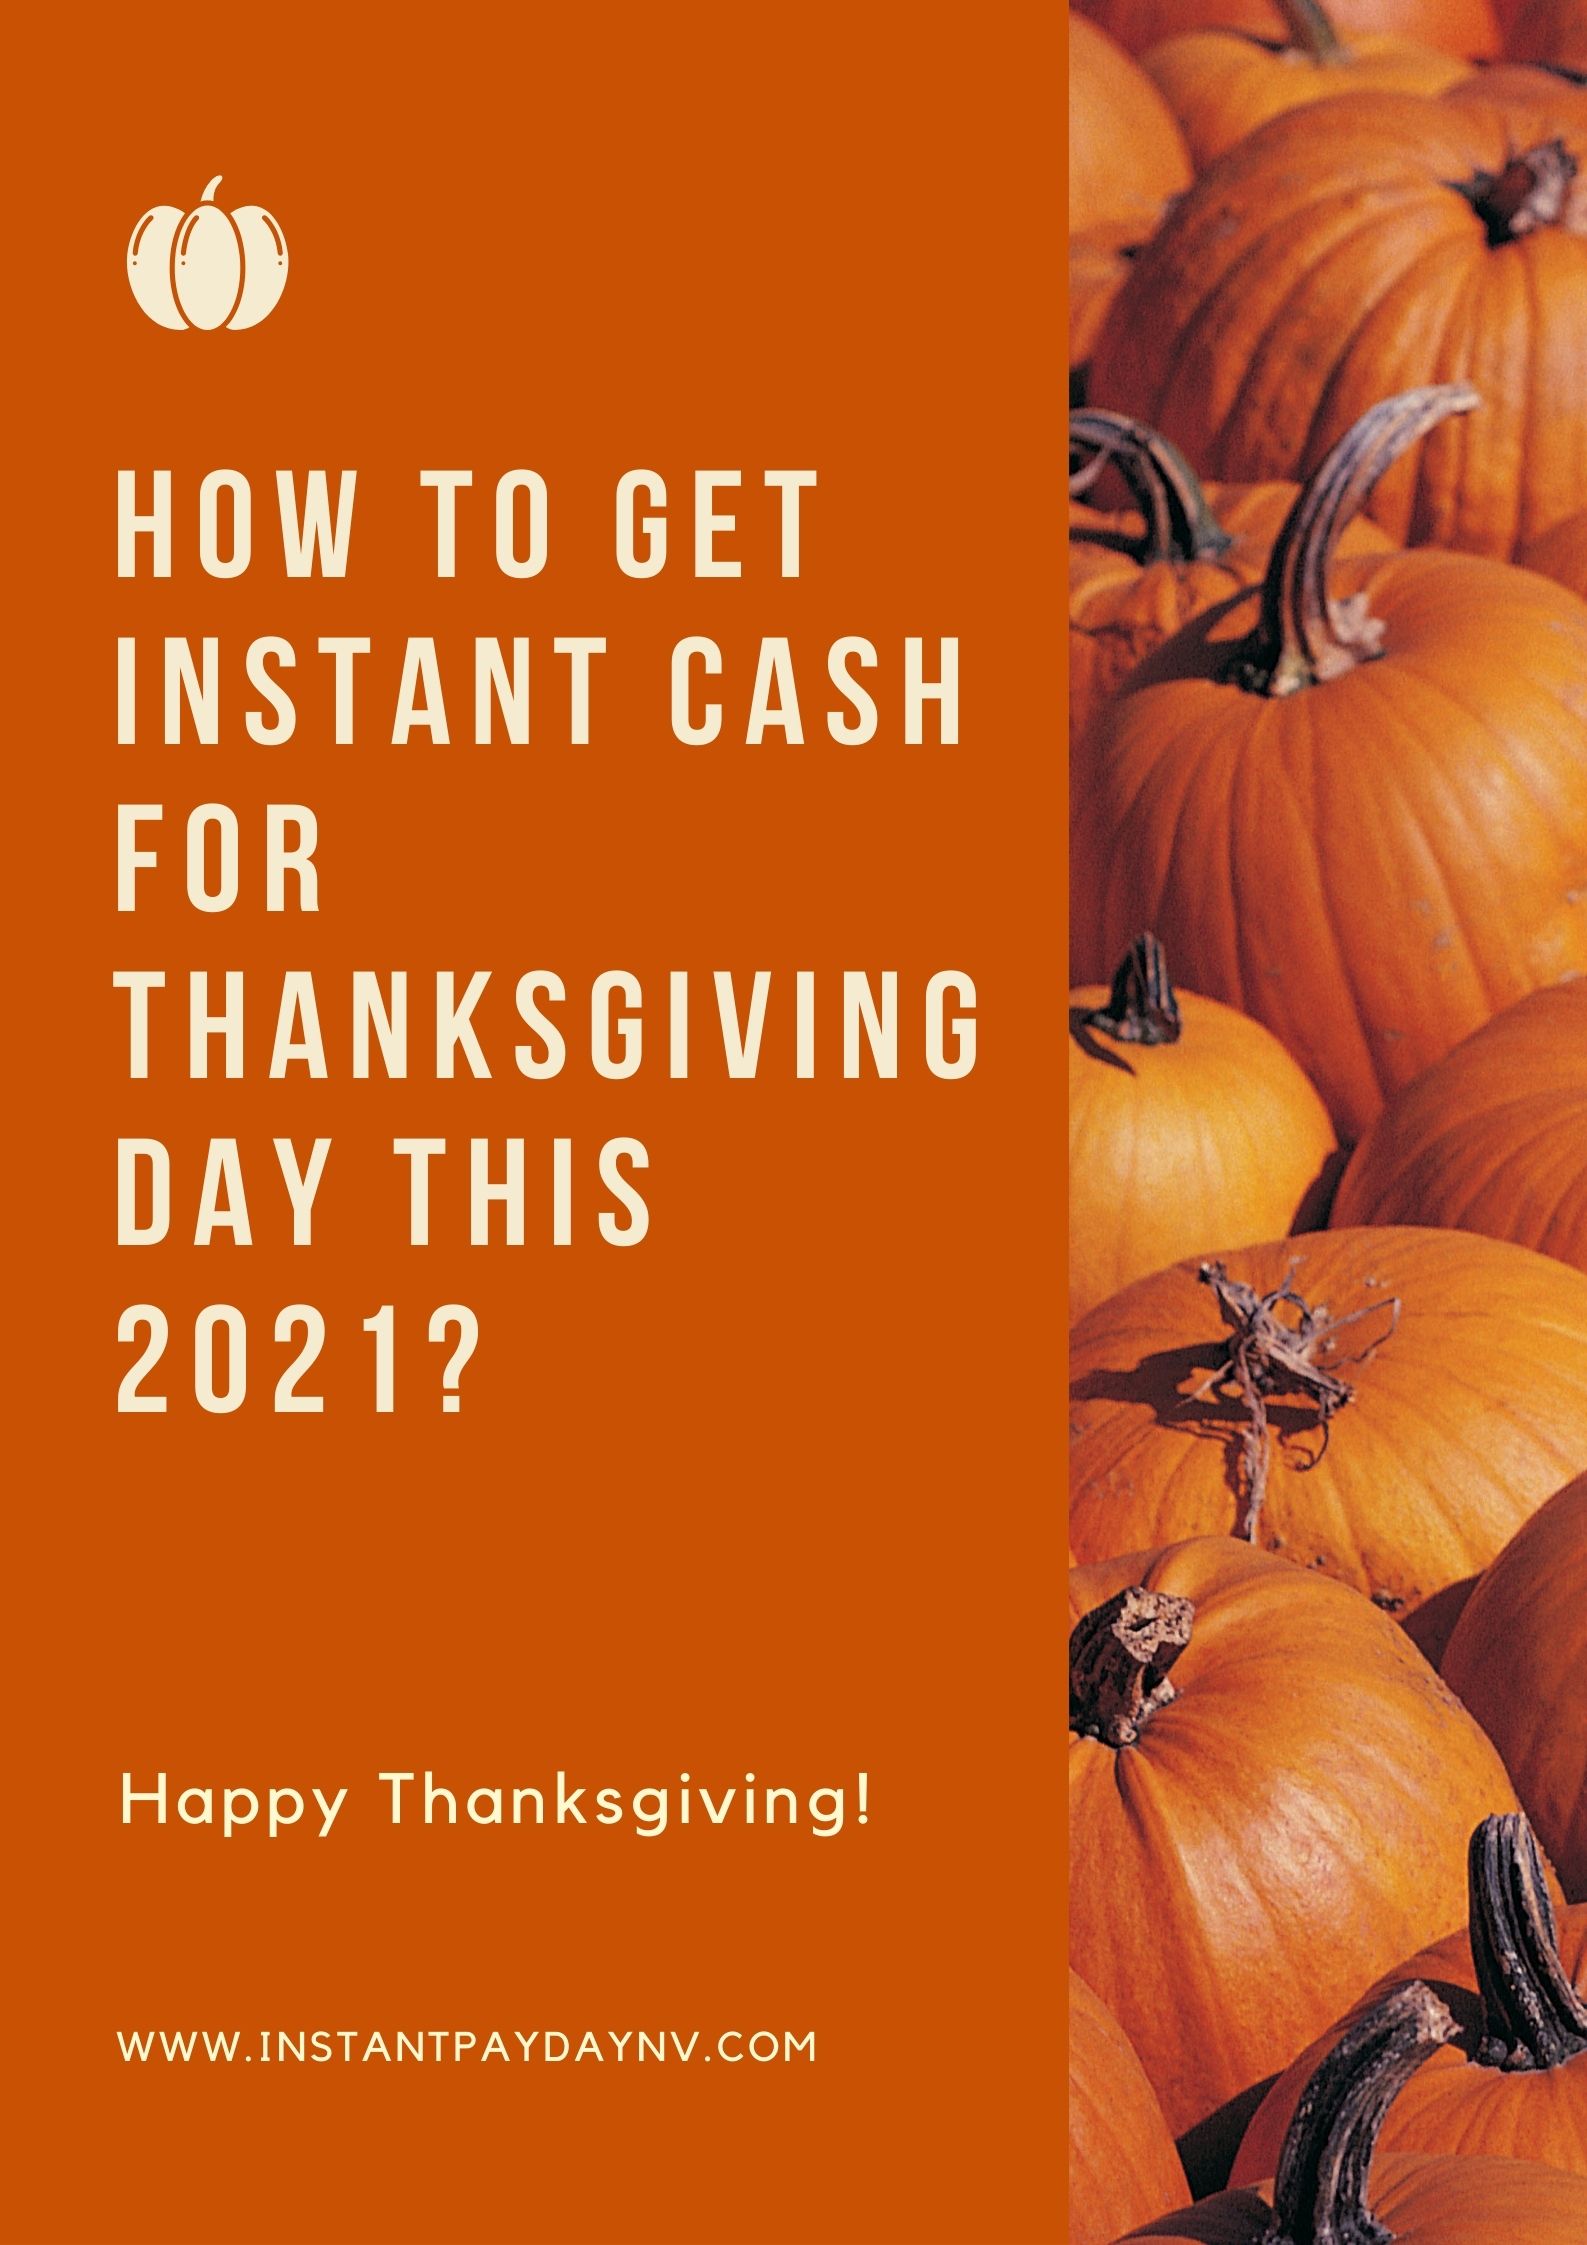 How to Get Instant Cash for Thanksgiving Day this Year?